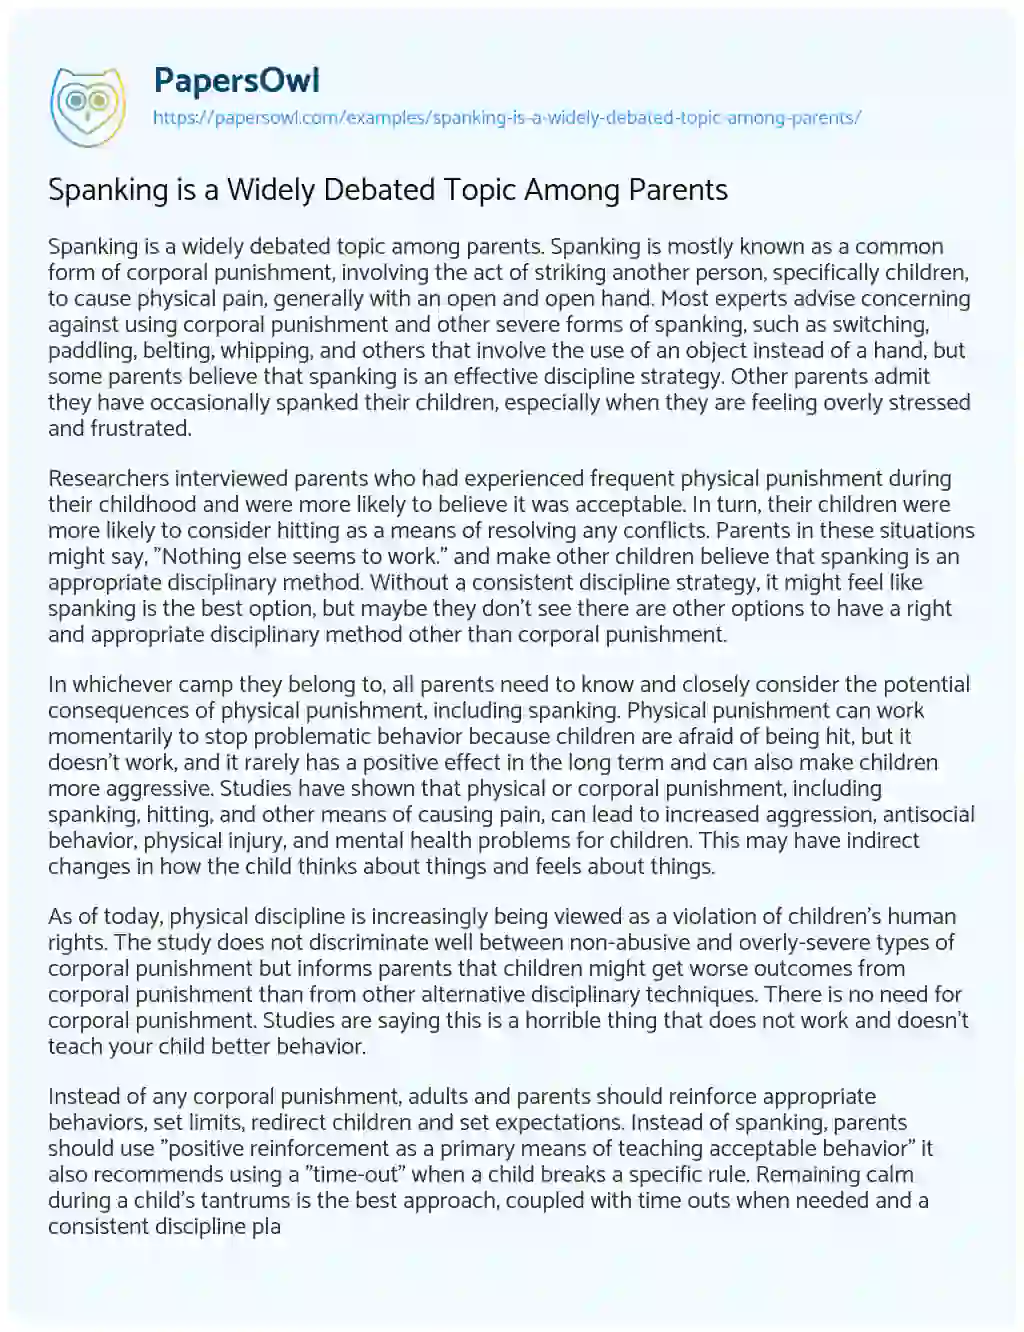 Essay on Spanking is a Widely Debated Topic Among Parents